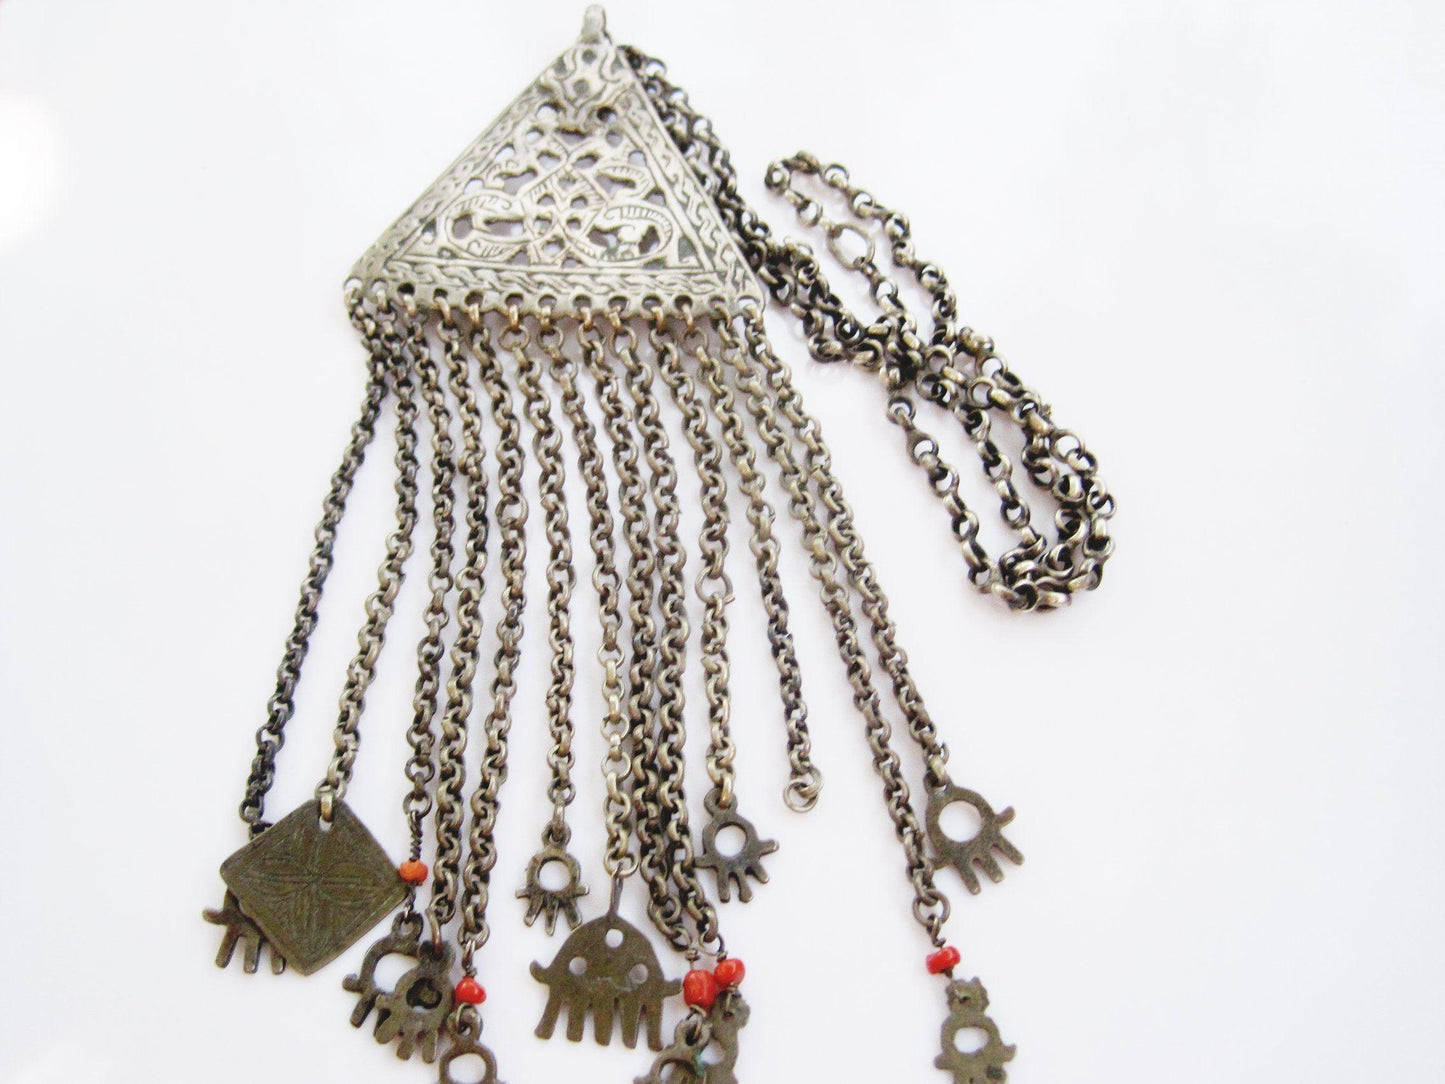 Vintage Silver and Coral Berber Necklace from Tunisia - Anteeka